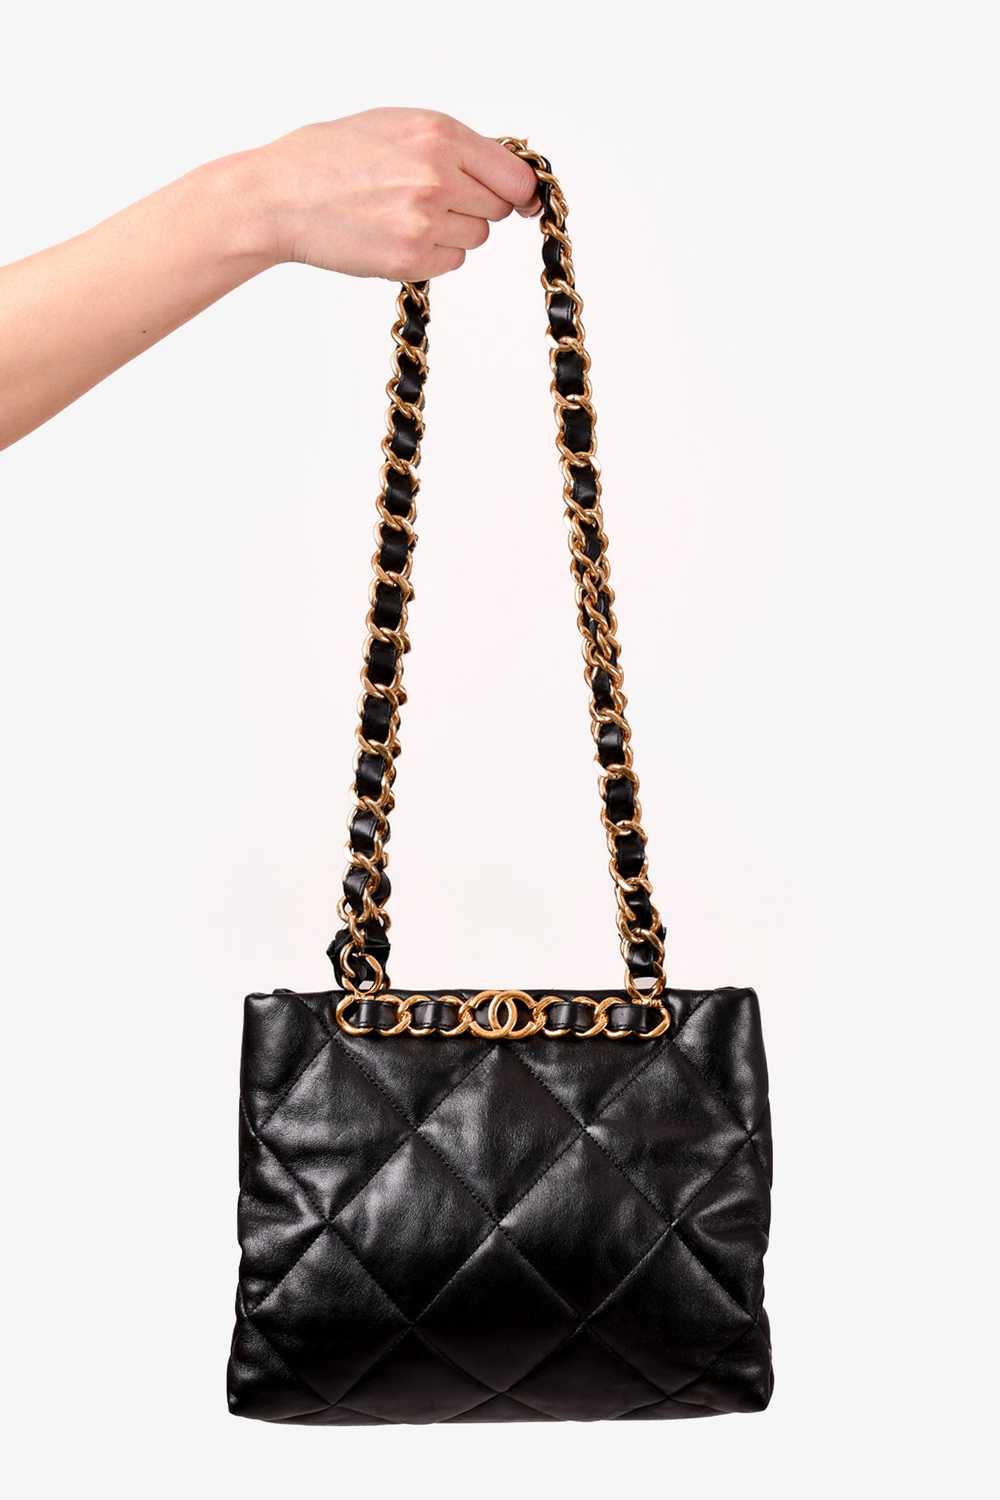 Pre-loved Chanel™ Black Lambskin Quilted Small Sh… - image 2